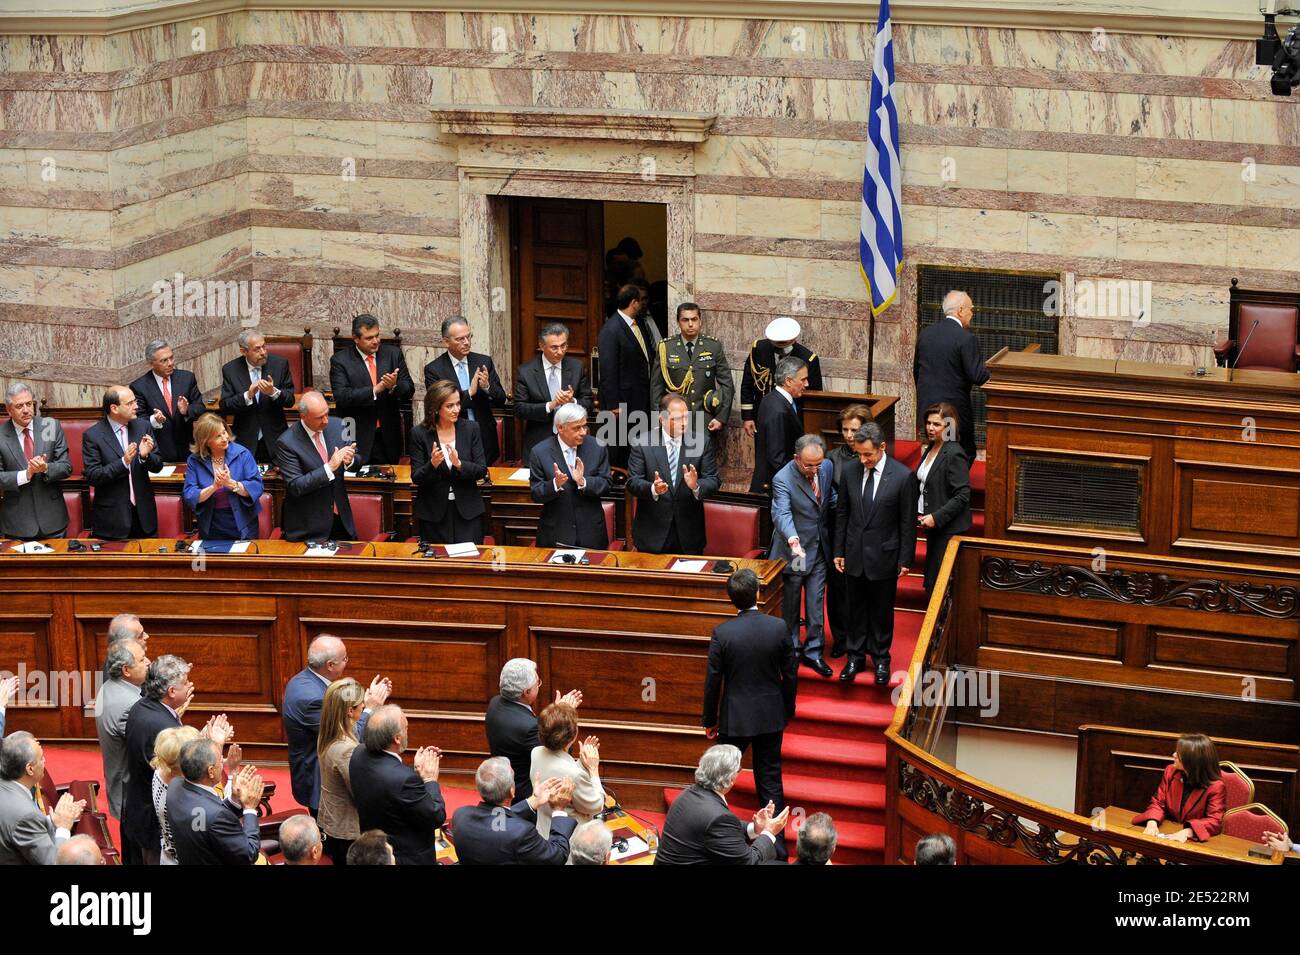 French President Nicolas Sarkozy greets members of the Greek parliament in Athens, Greece on June 6, 2008. Sarkozy arrived in Greece Friday for an official visit, the first by a French head of state in more than 25 years. Sarkozy was addressing the Greek parliament in a ceremony only accorded to three foreign presidents in the past: his predecessor Charles de Gaulle and US presidents Dwight Eisenhower and George Bush Sr. Photo by Mousse/ABACAPRESS.COM Stock Photo